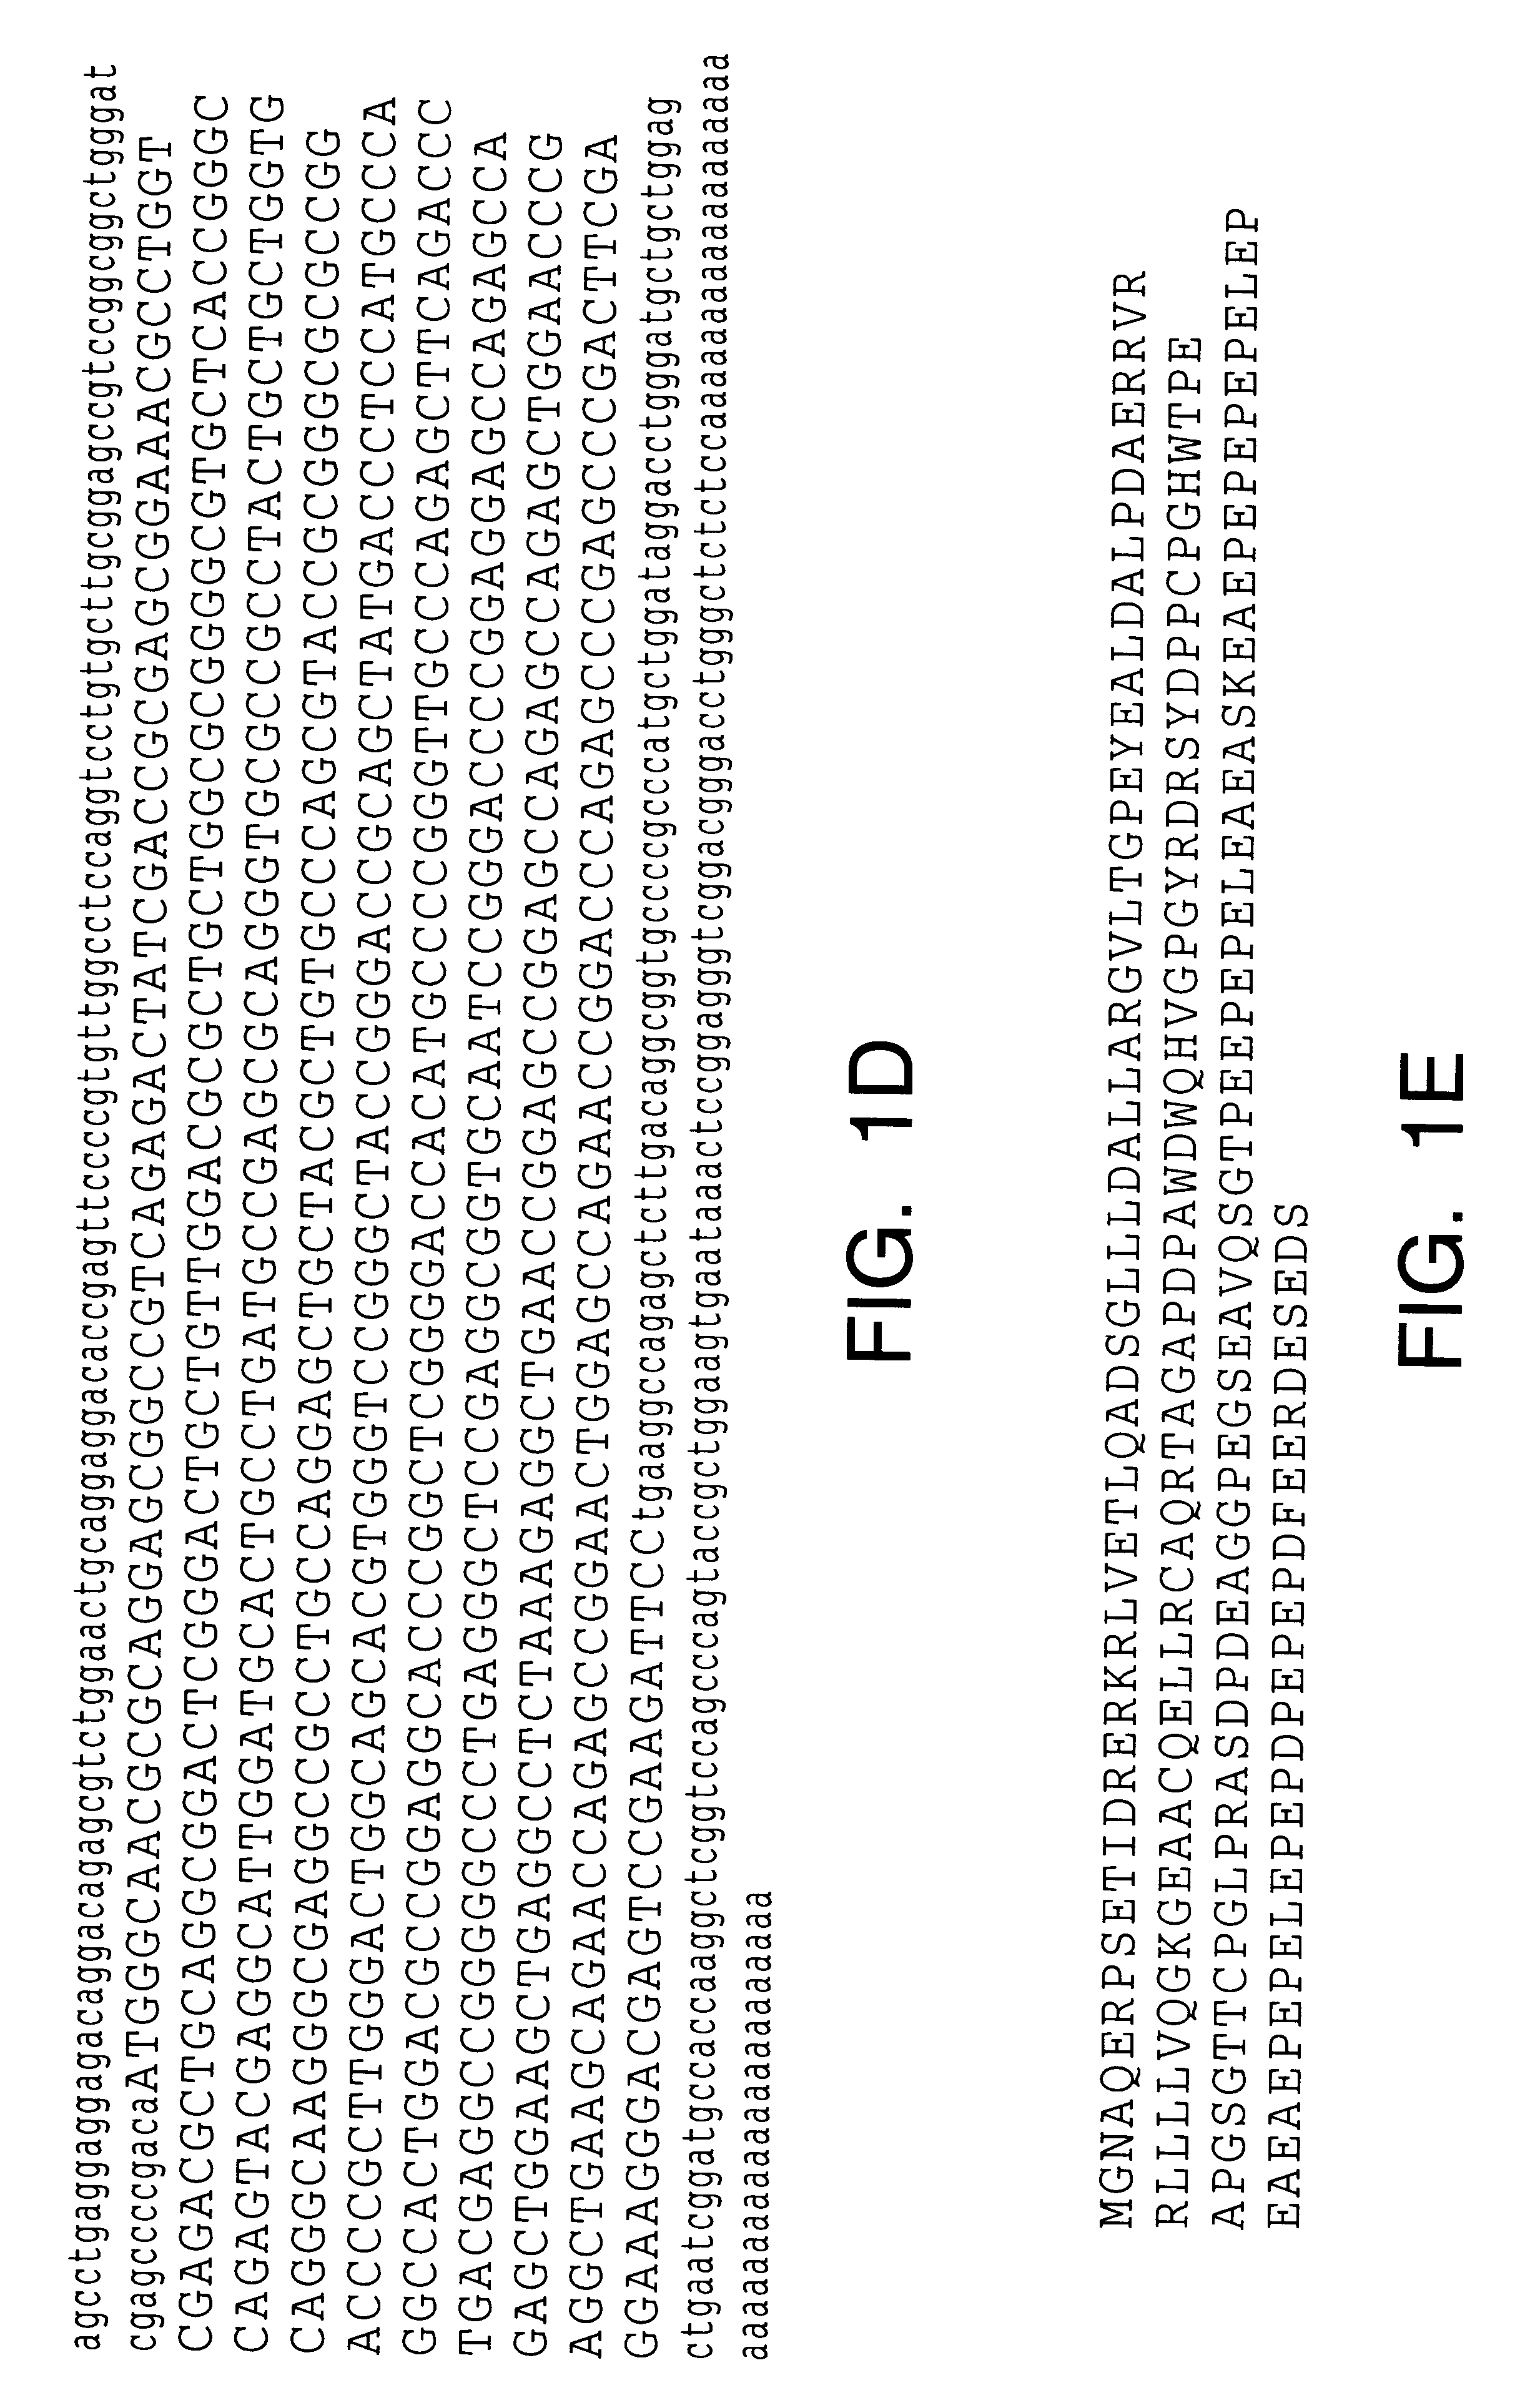 Compositions and methods for identifying apoptosis signaling pathway inhibitors and activators